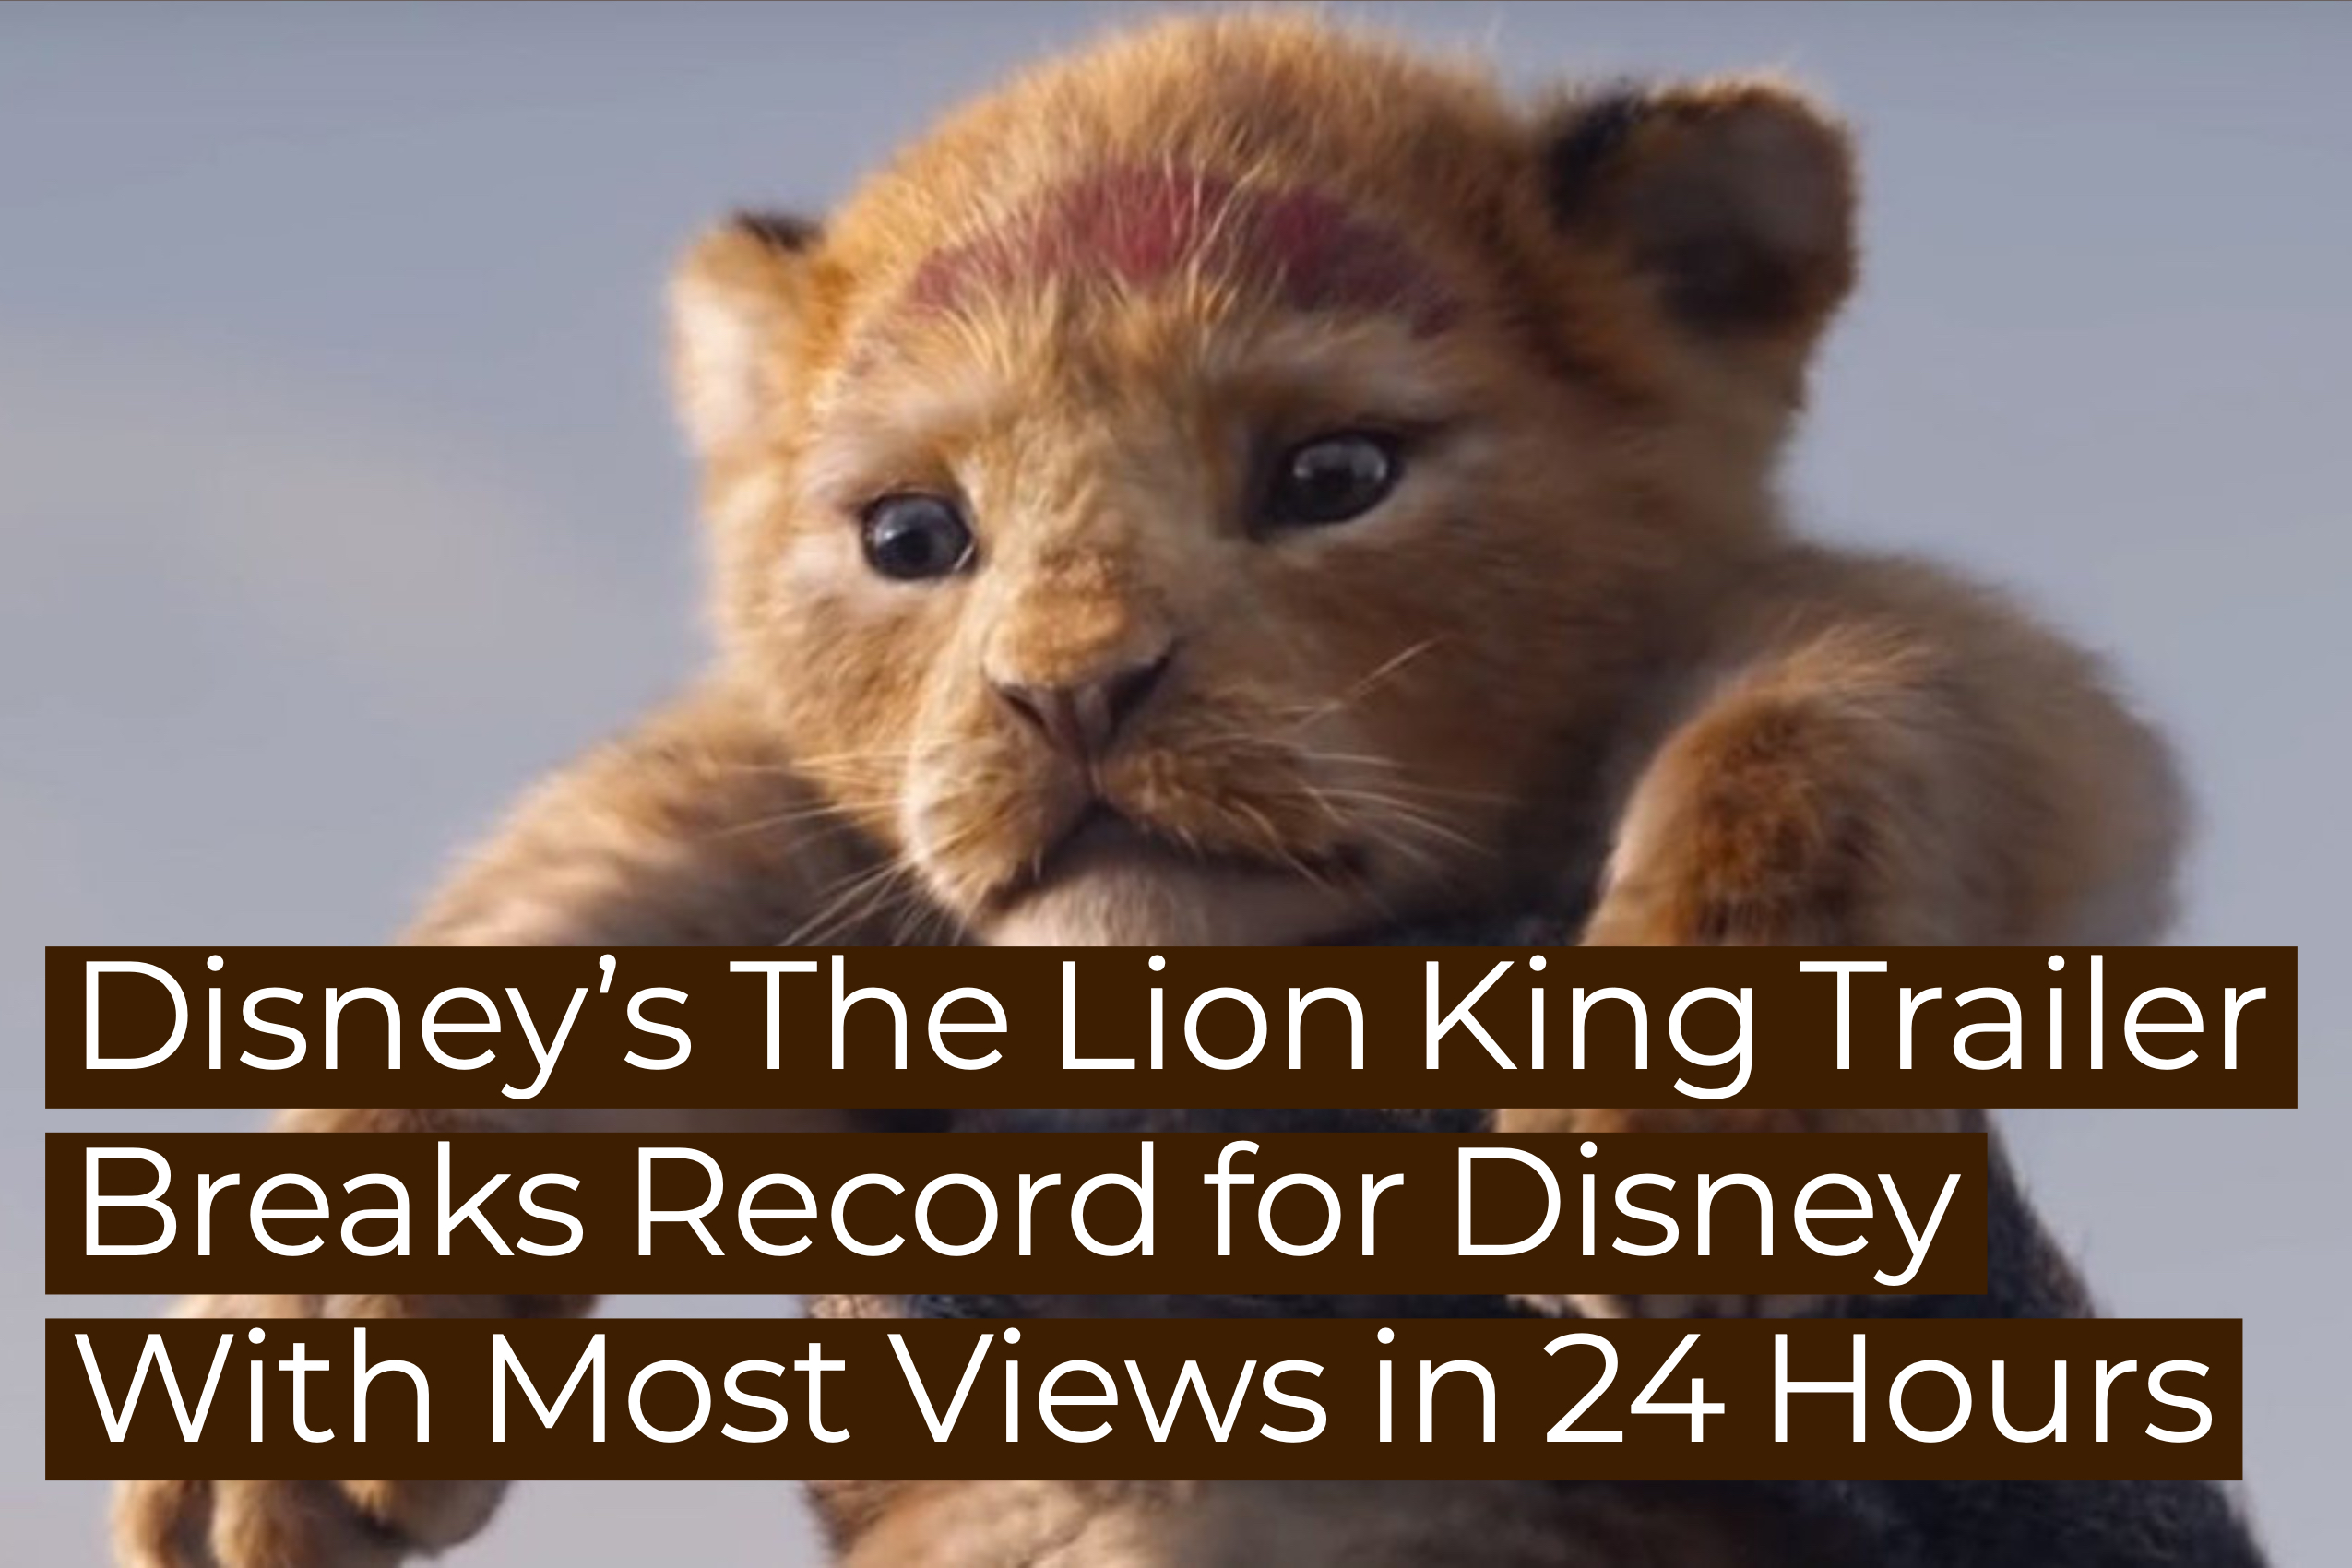 Disney’s The Lion King Trailer Breaks Record for Disney With Most Views in 24 Hours